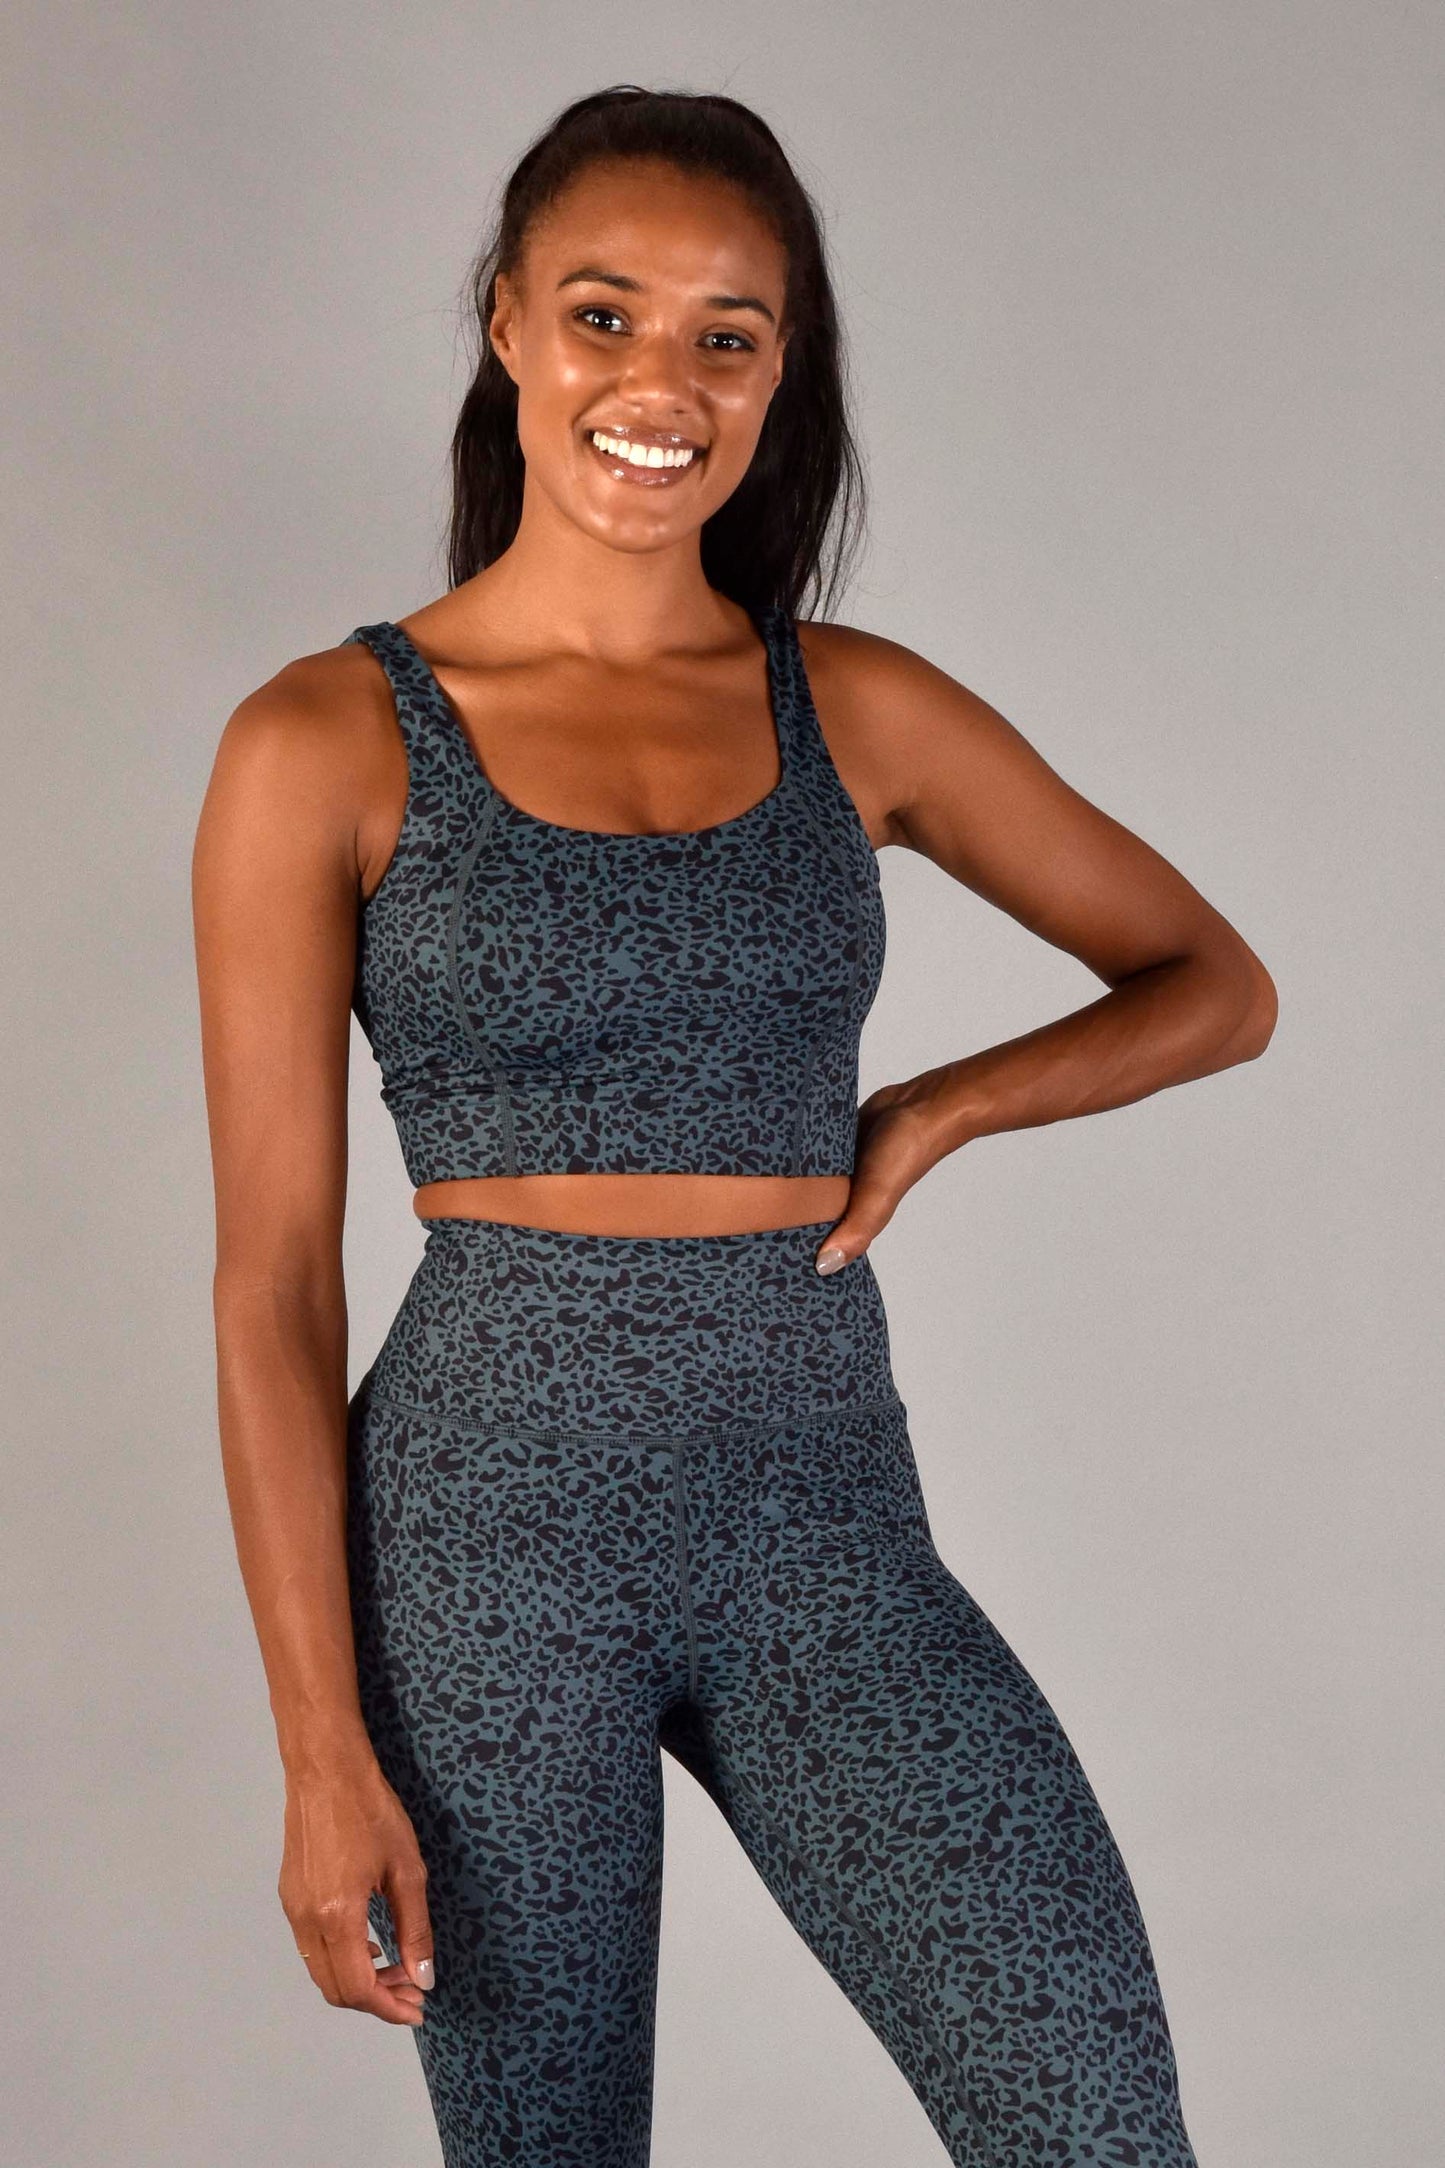 WEAR LOVE MORE Designer Sustainable Activewear.  Sophia Longline Bra in Emerald Leopard.  Dark Blue Green Leopard Print Bra Support Top.  Paired with 7/8 Emerald Leopard Legging.  Luxury Recycled Performance Fabric.